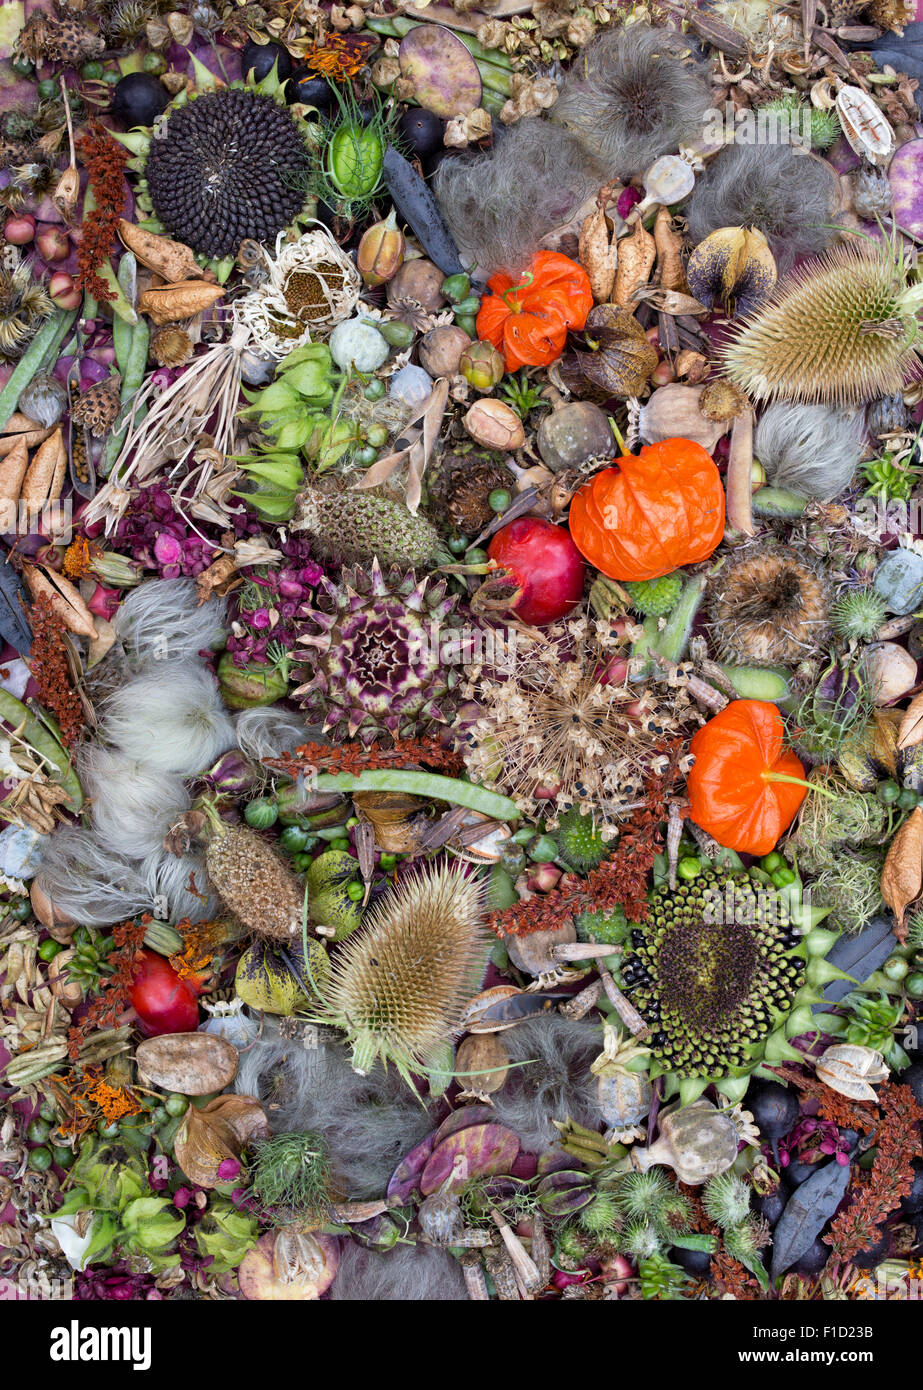 Collection of dried flower seed pods and seeds from the garden Stock Photo